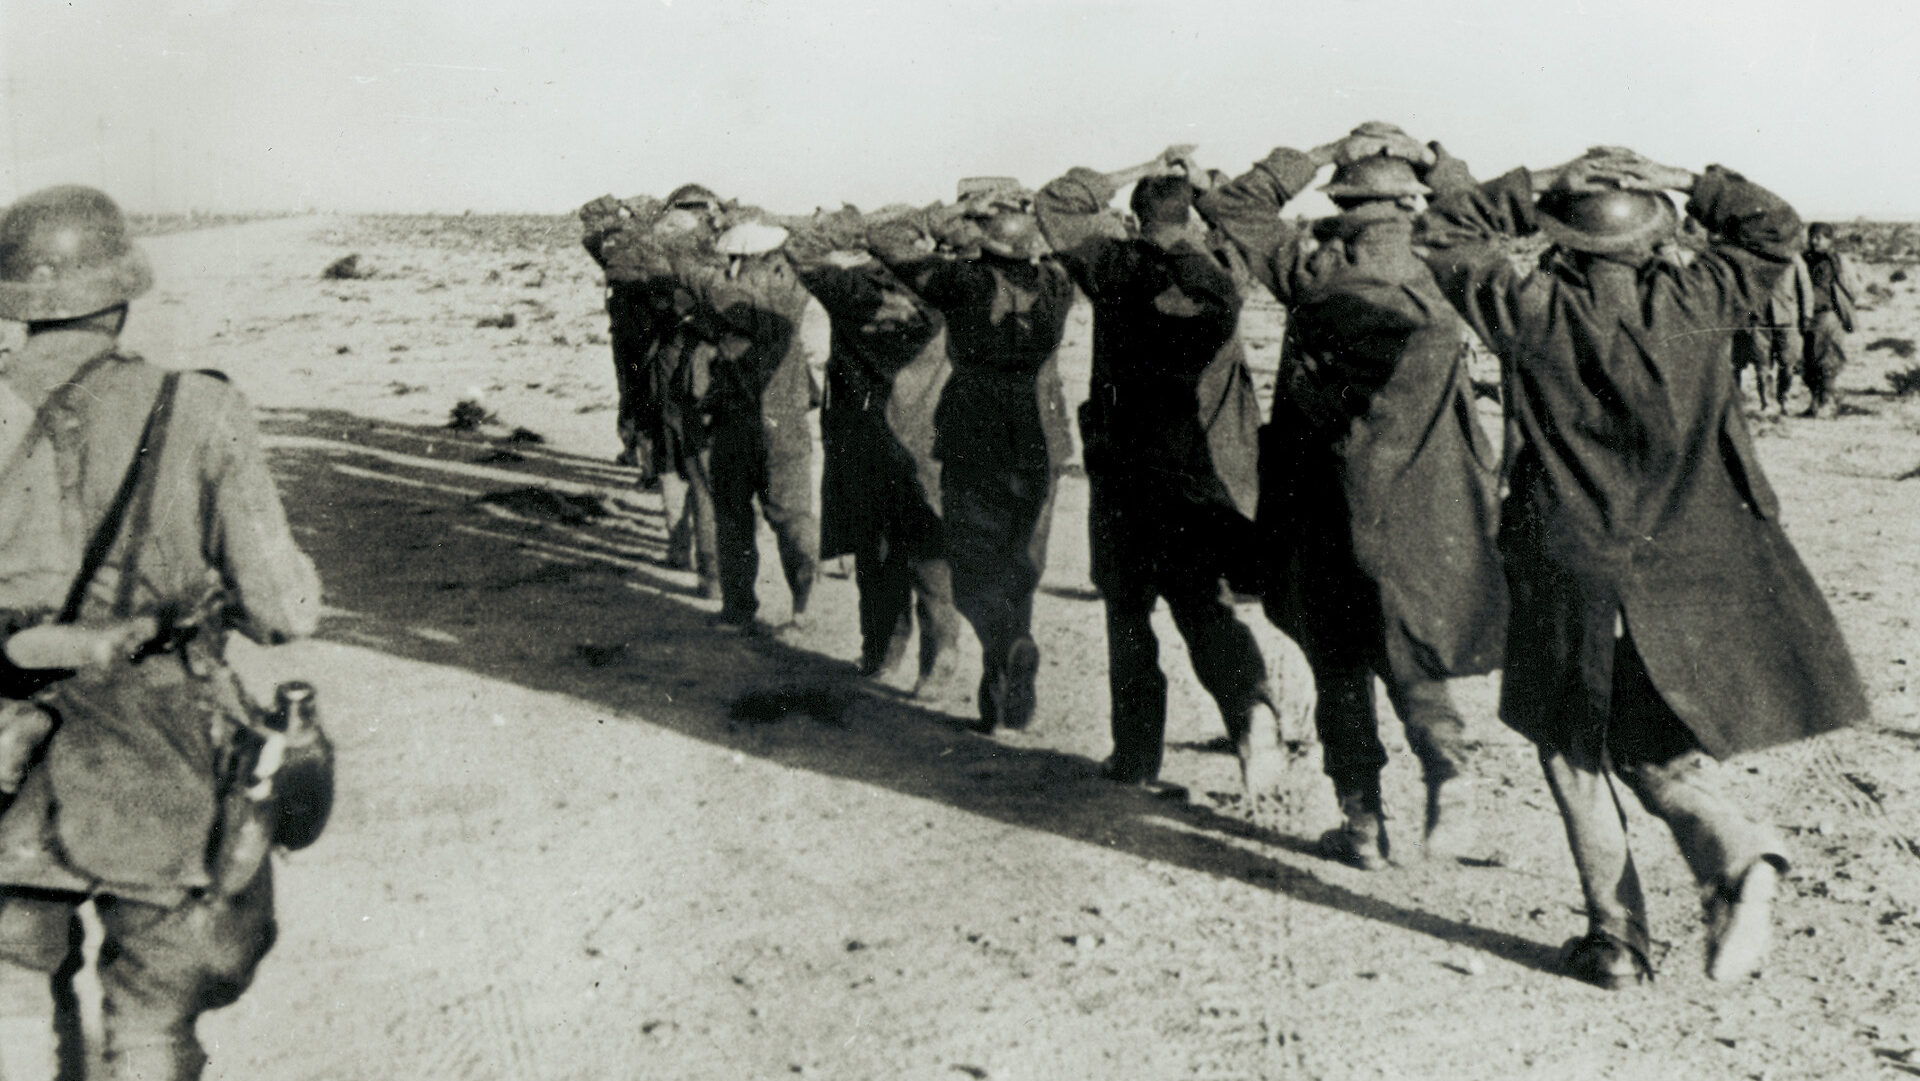 British prisoners march off under German guard after the capture of Tobruk. Rommel was aided in this astonishing coup of June 1942 by knowledge of British plans intercepted from messages by the U.S. Military Attaché in Cairo.